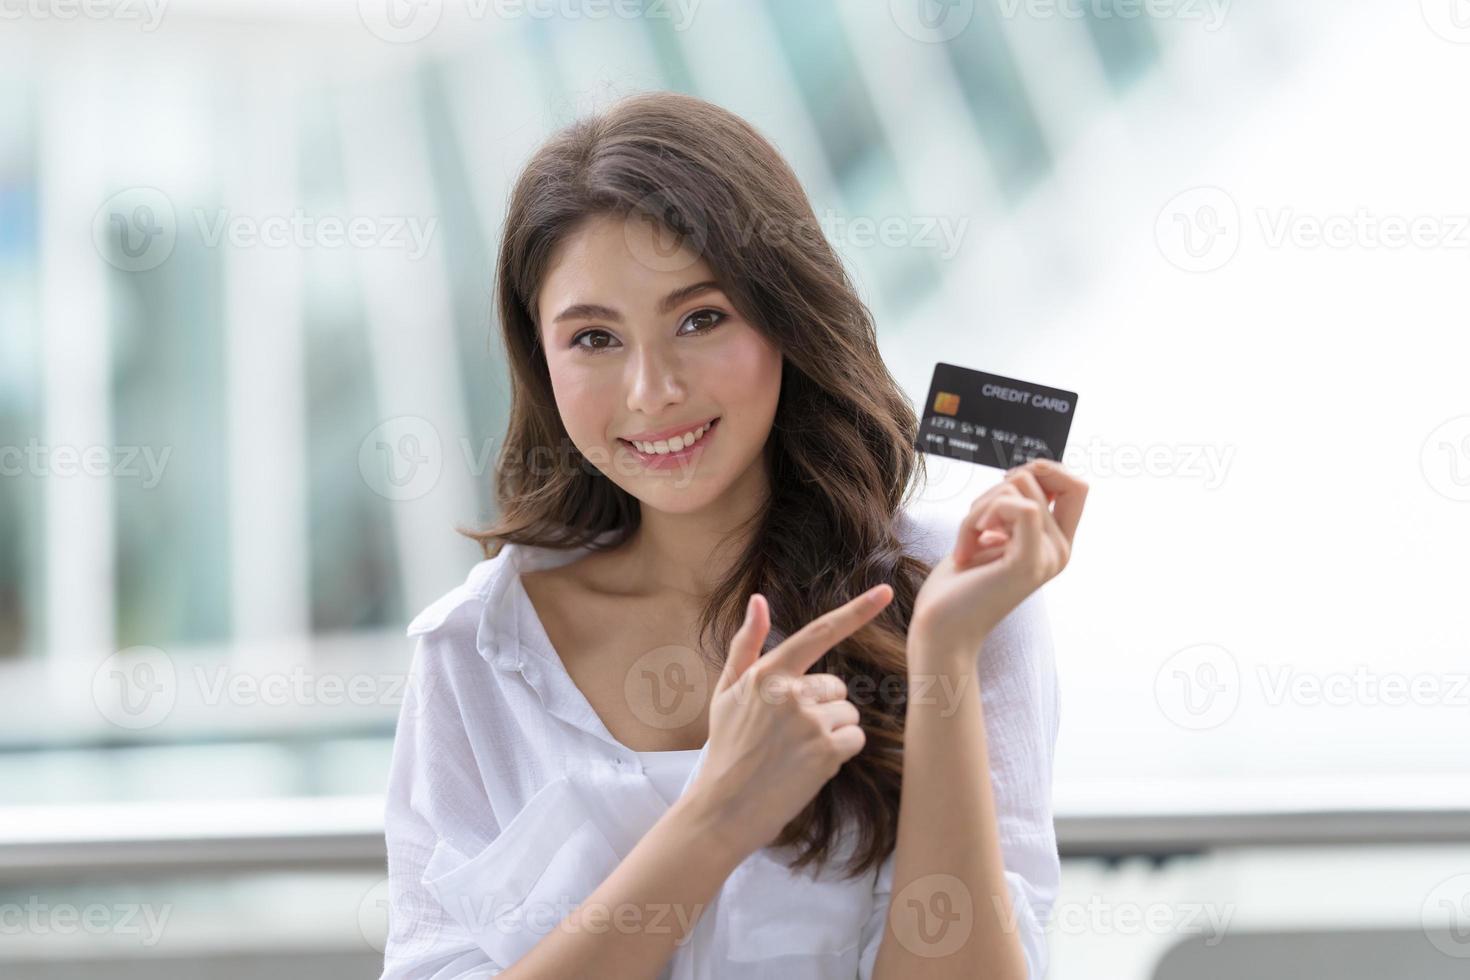 Black Friday concept, Woman holding credit card and smiling near the store photo